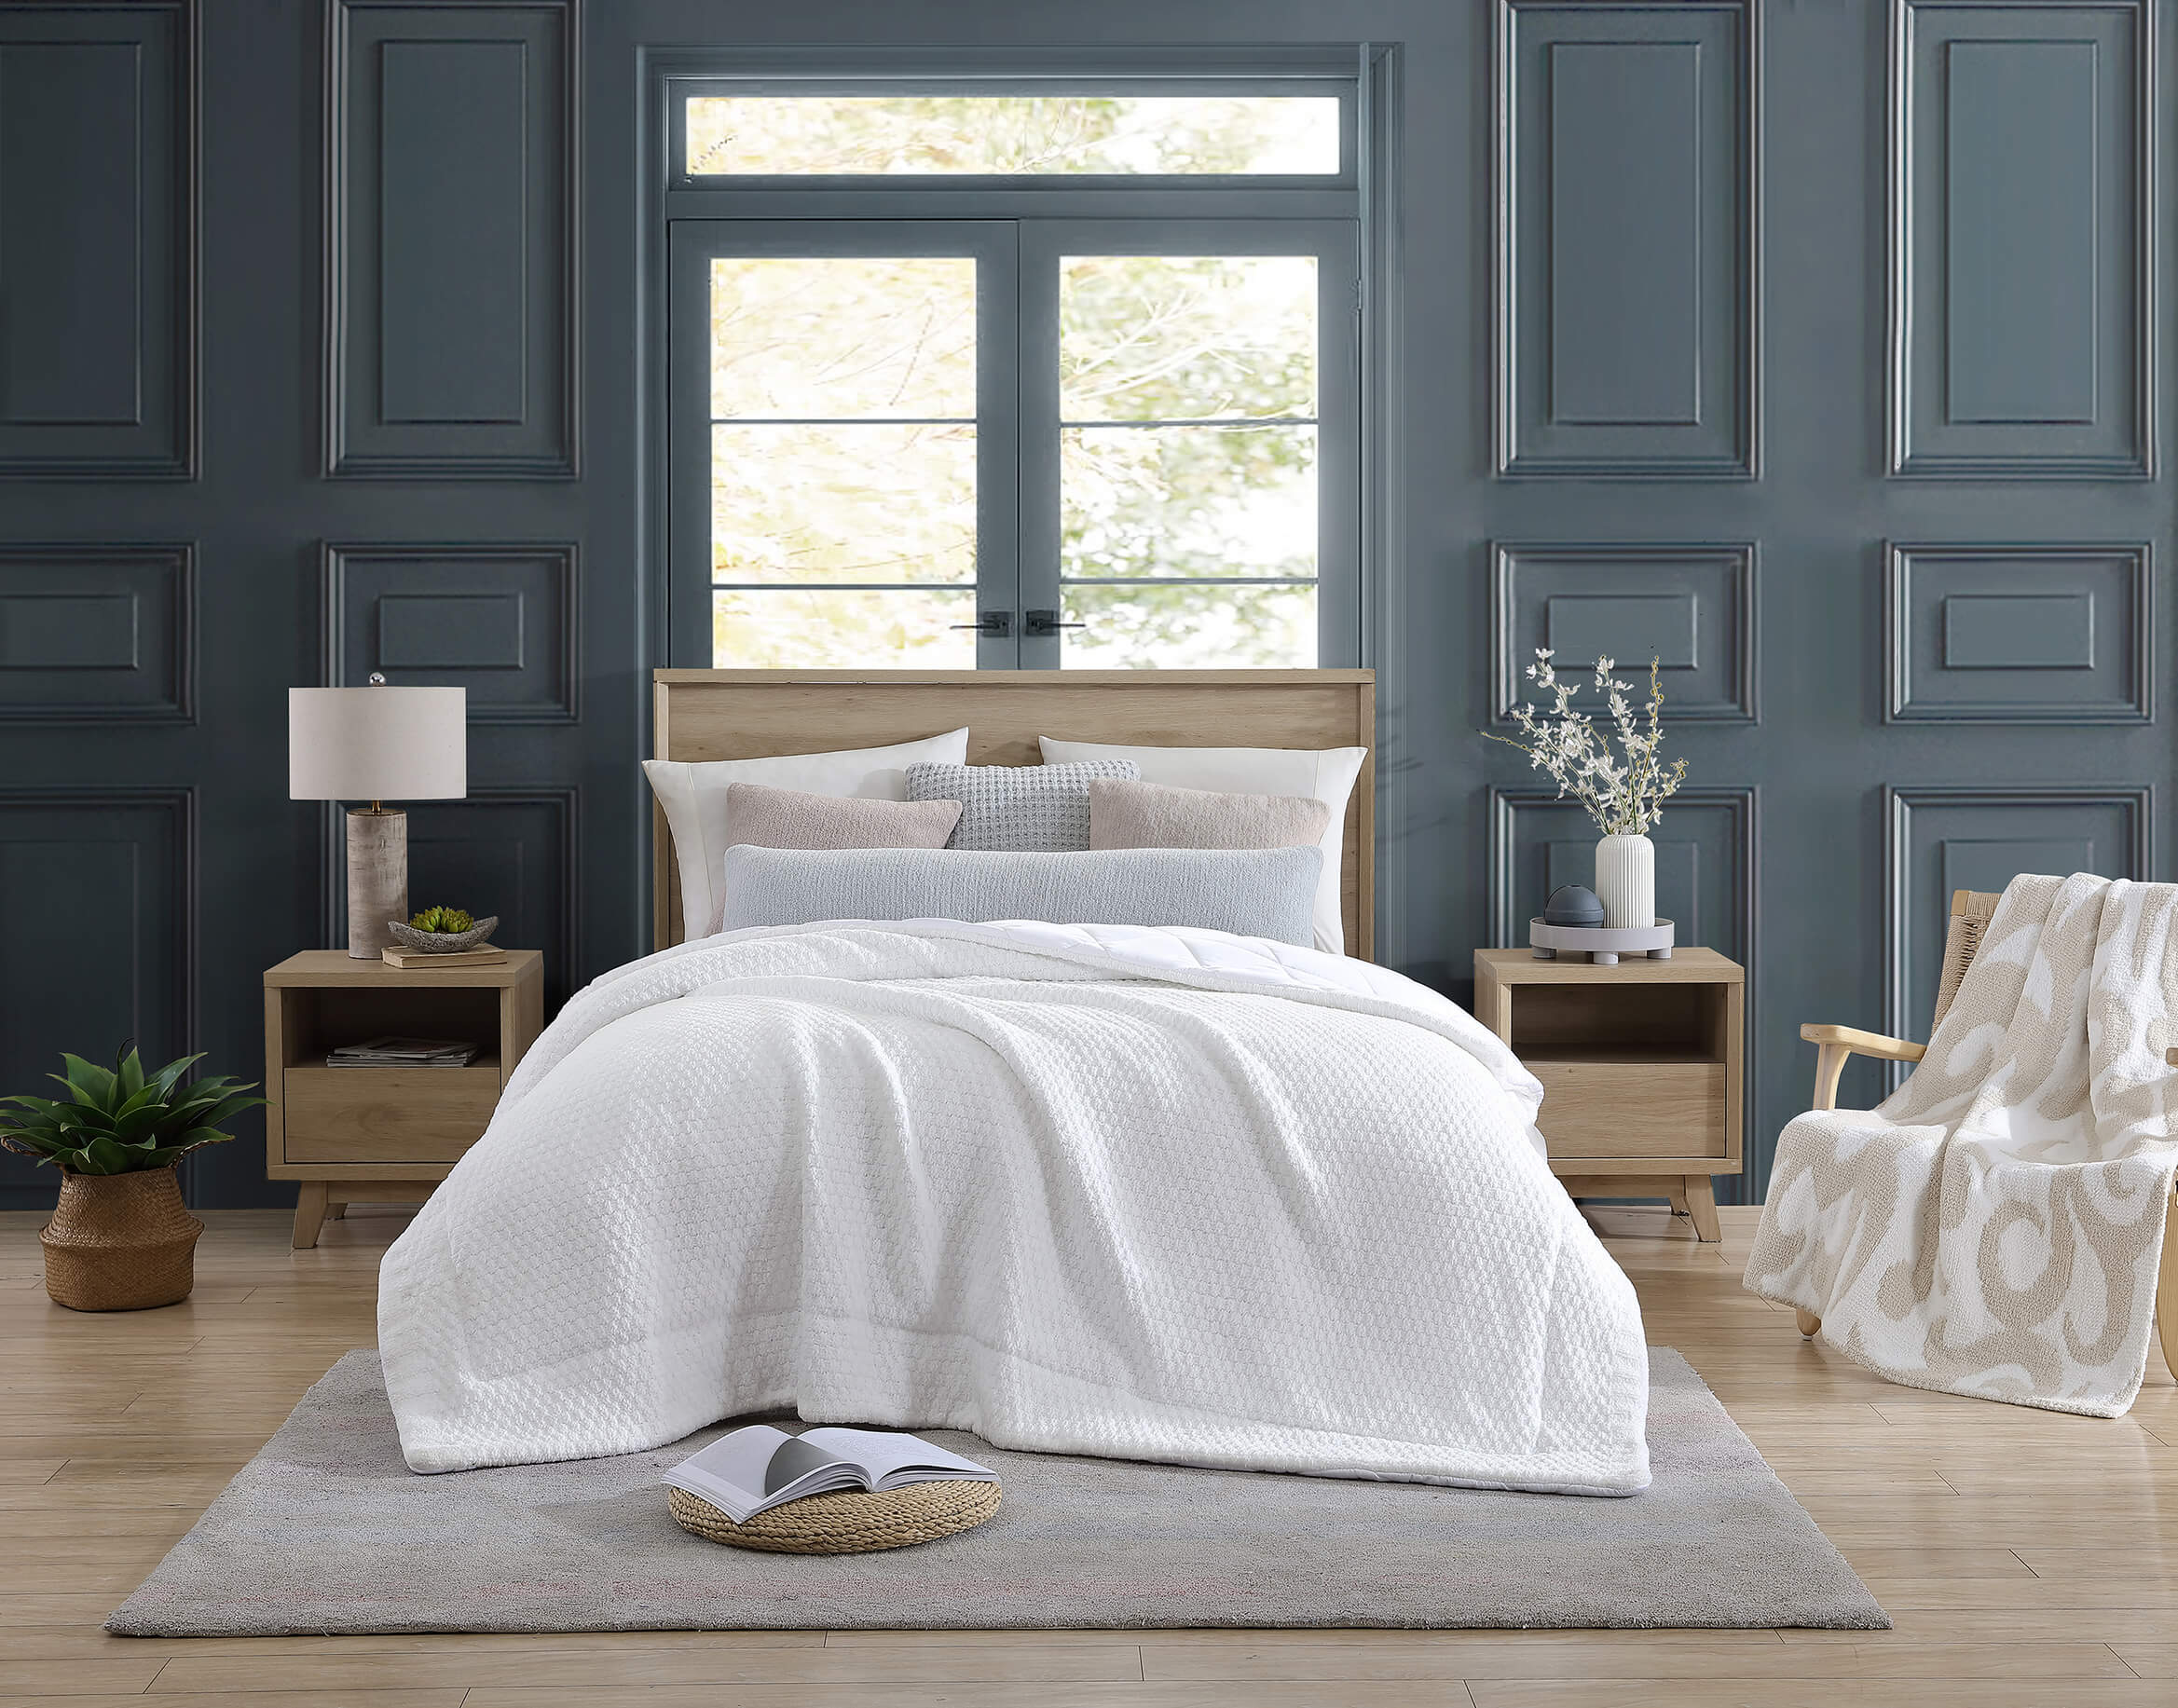 Bedroom accent wall. Accent wall for the bedroom. Dark accent wall. Gray coal accent wall. Modern Victorian bedroom aesthetic. White comforter with colored pillows. White bedding with neutral decor pillows. 